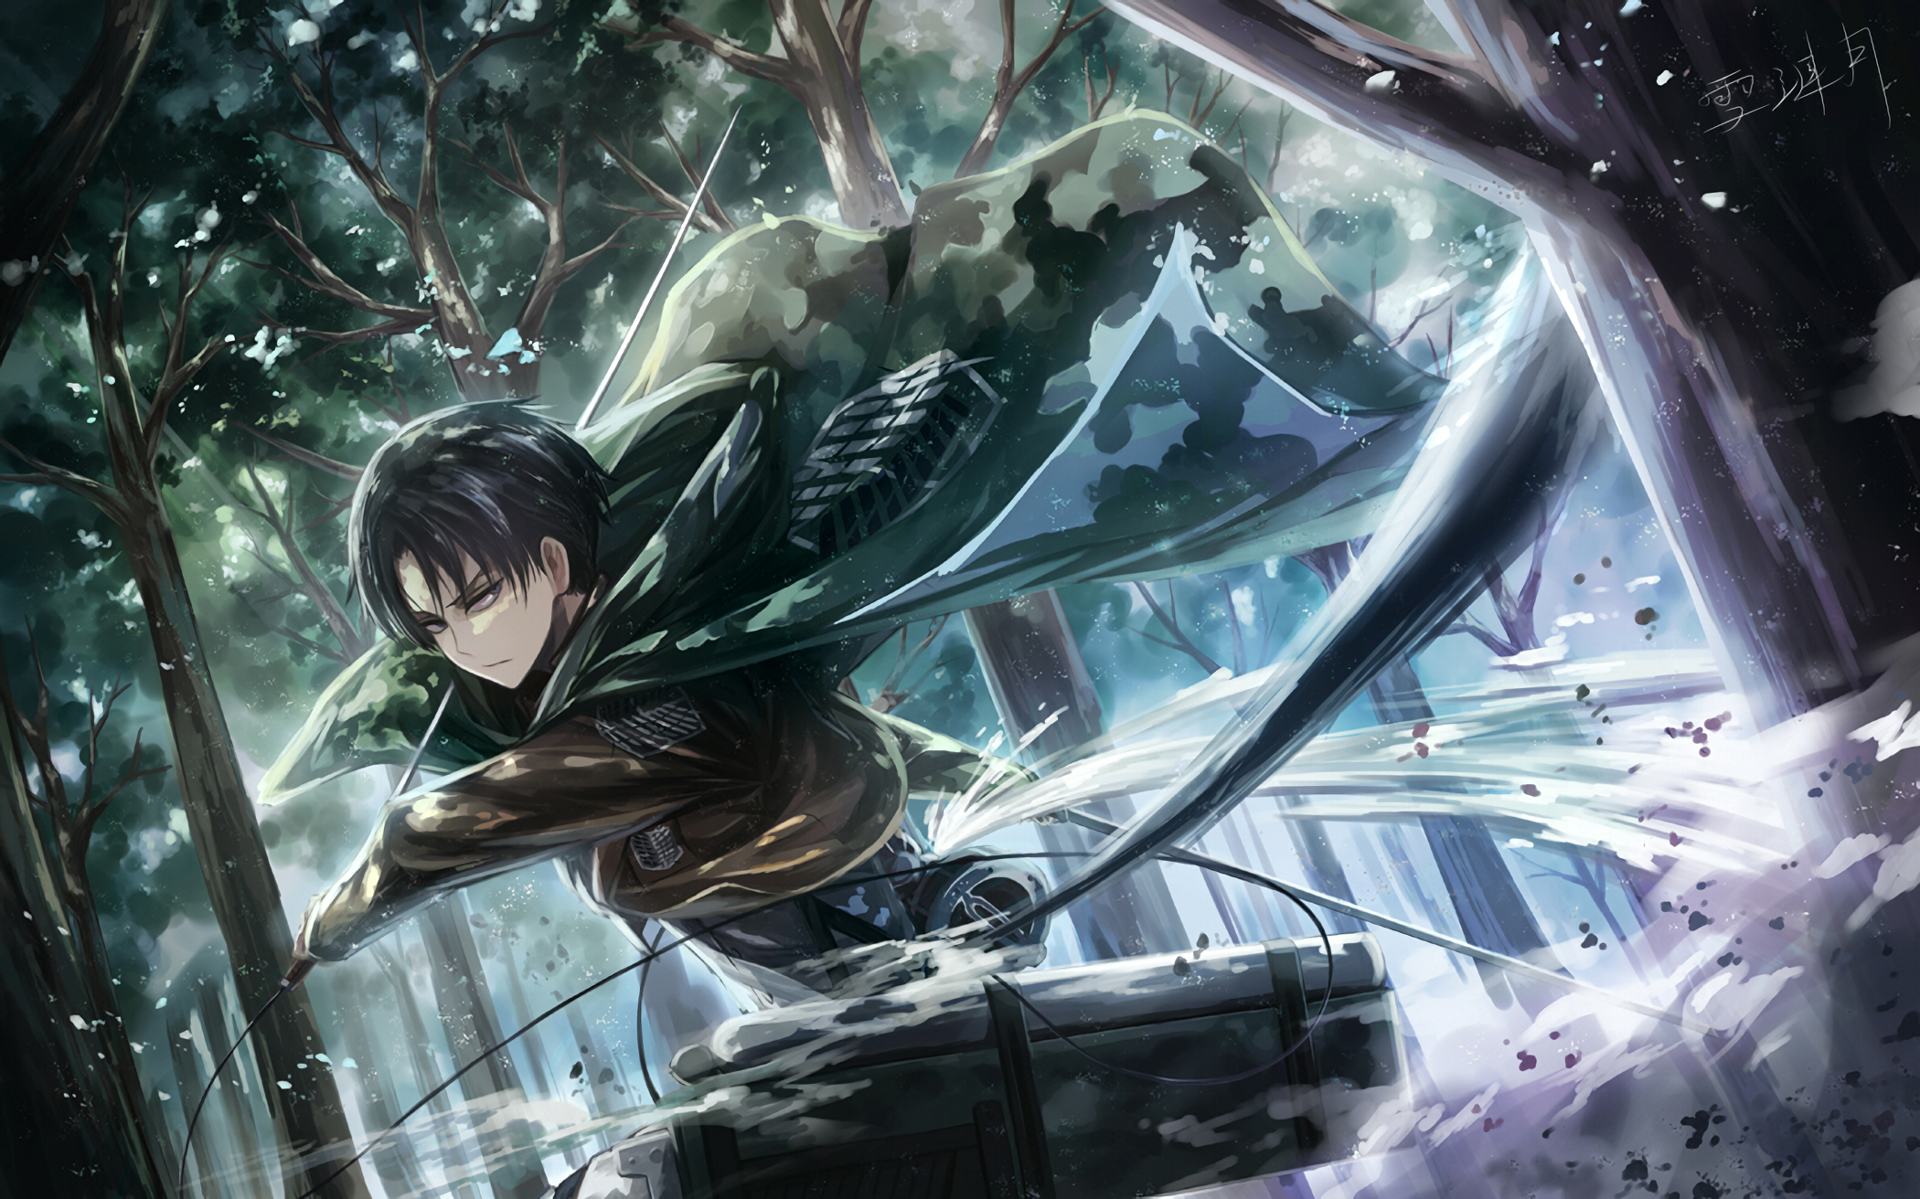 540+ Levi Ackerman HD Wallpapers and Backgrounds